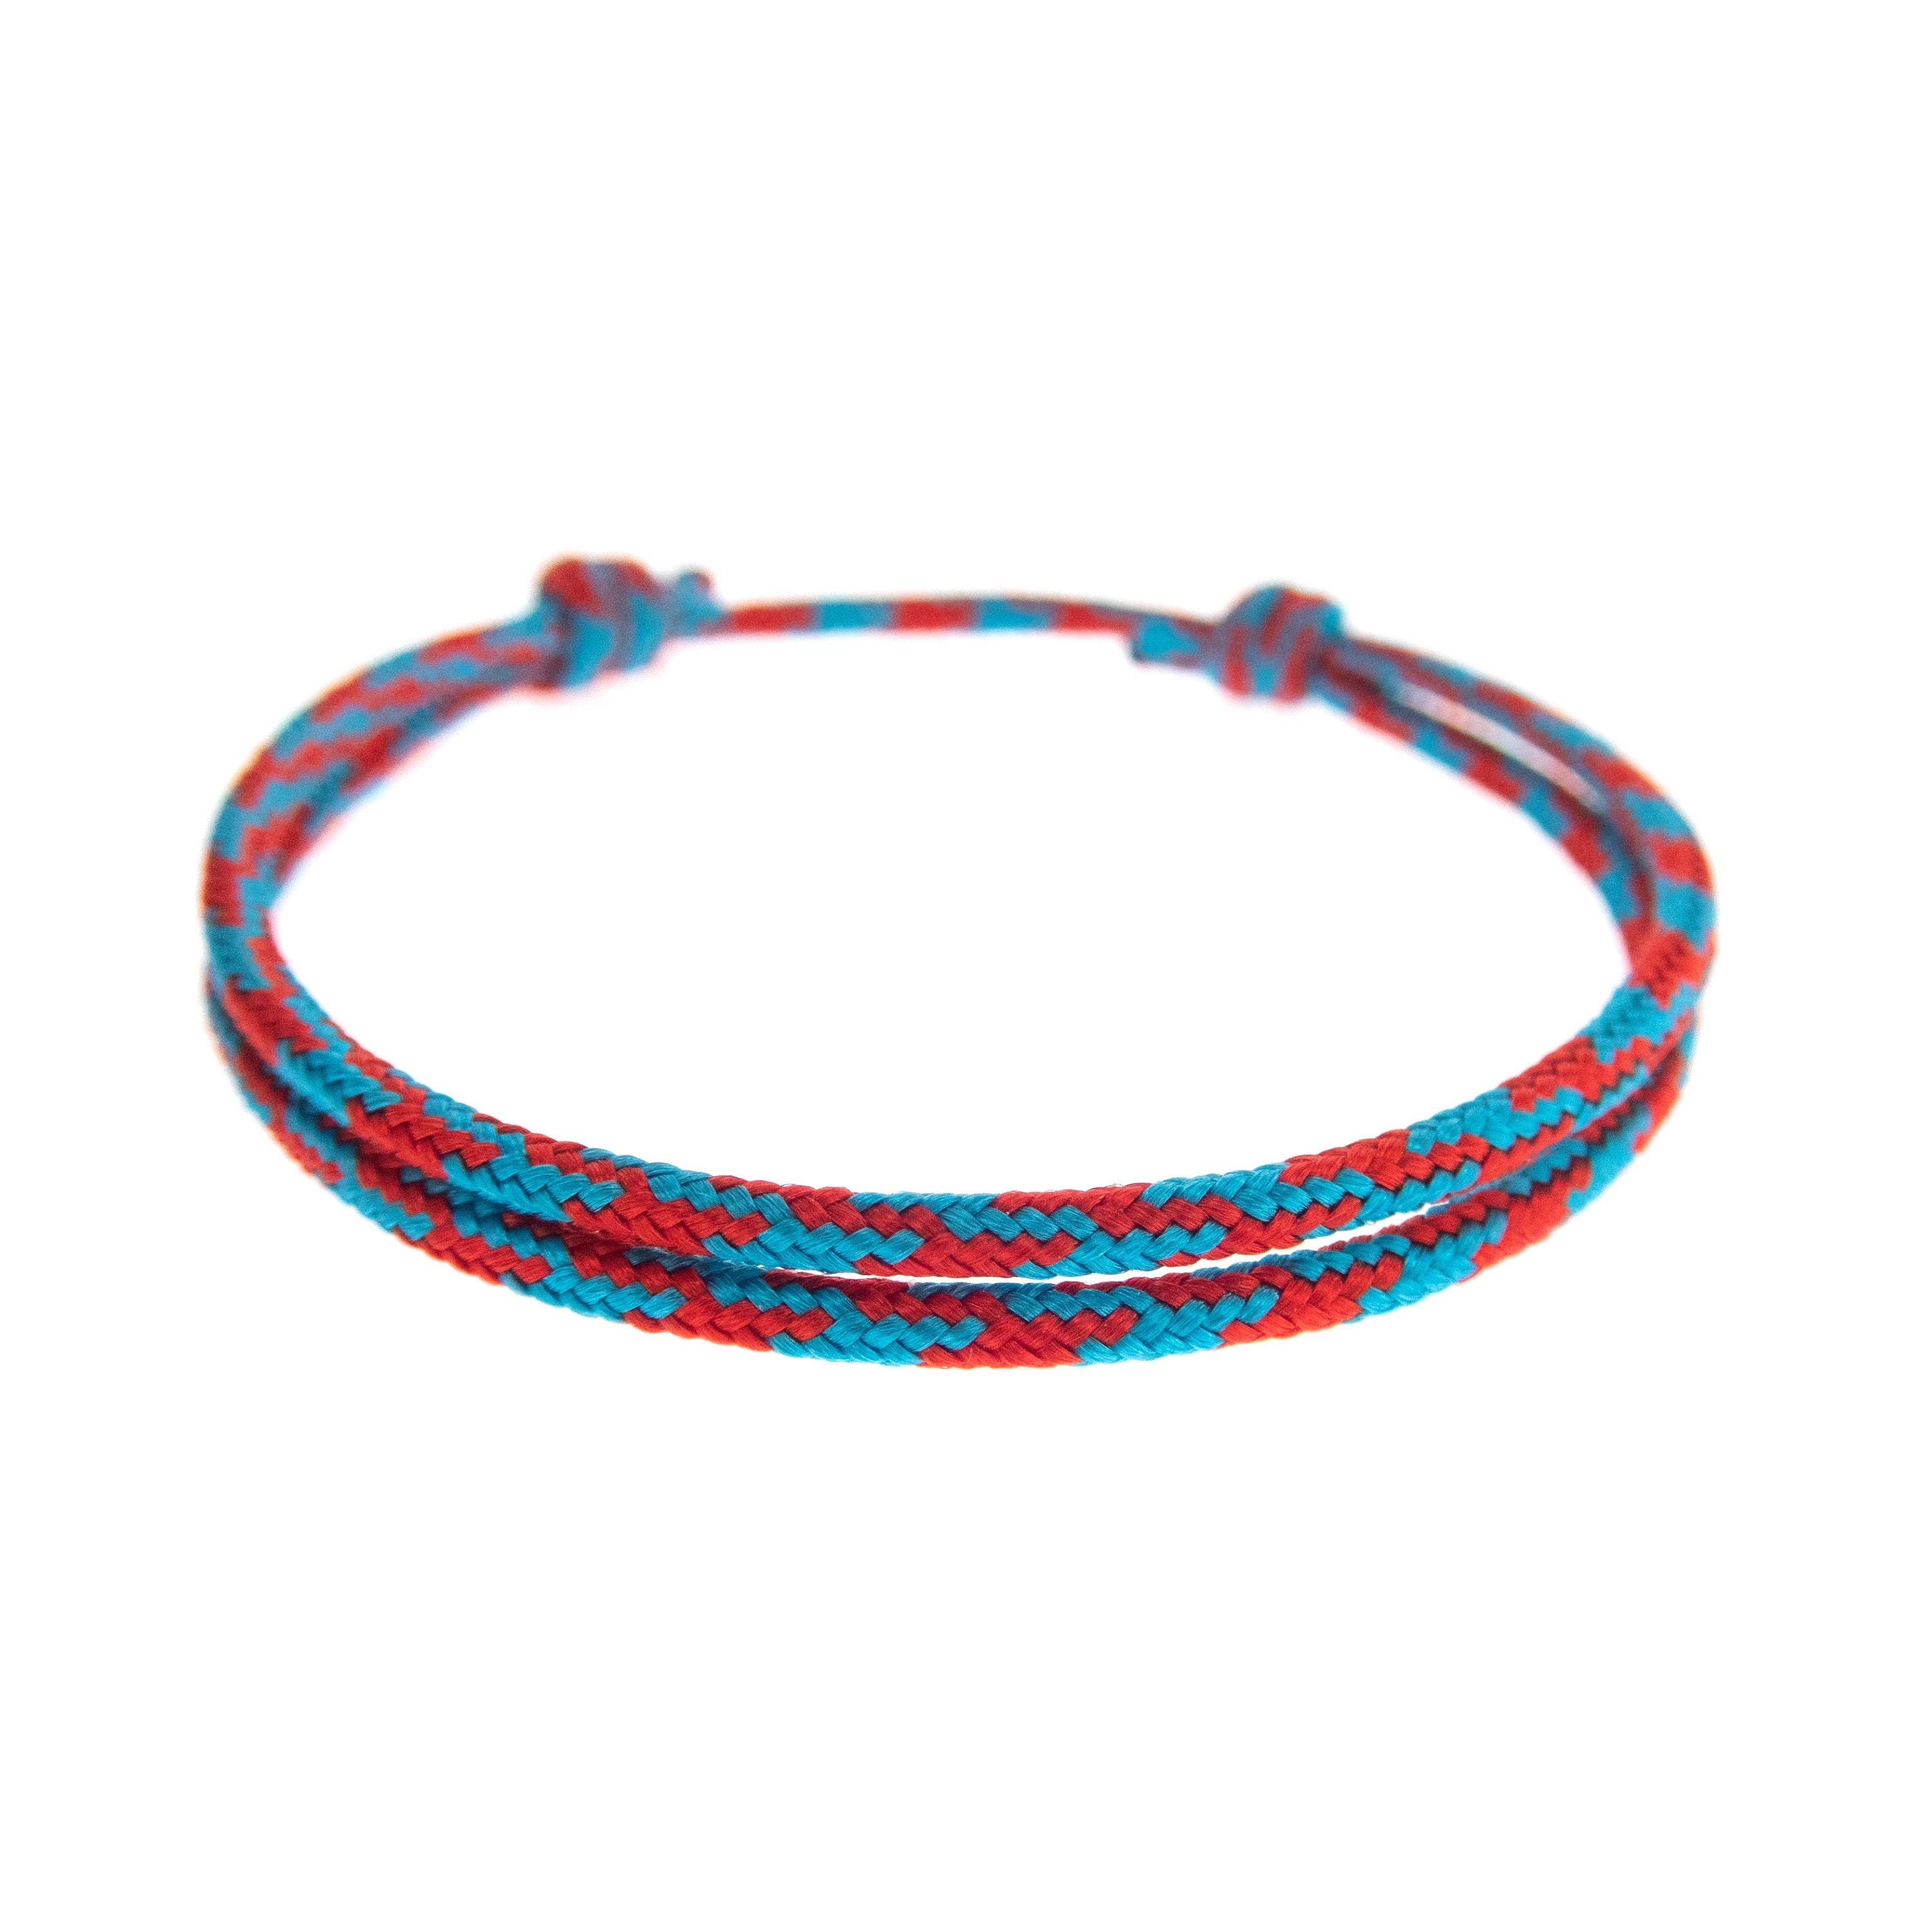 Very Simple Bracelet Adjustable. Friendship Bracelets String. Easy  Adjustable Everyday Jewelry of Colorful Paracord, Cute Rope, Unisex. 2mm